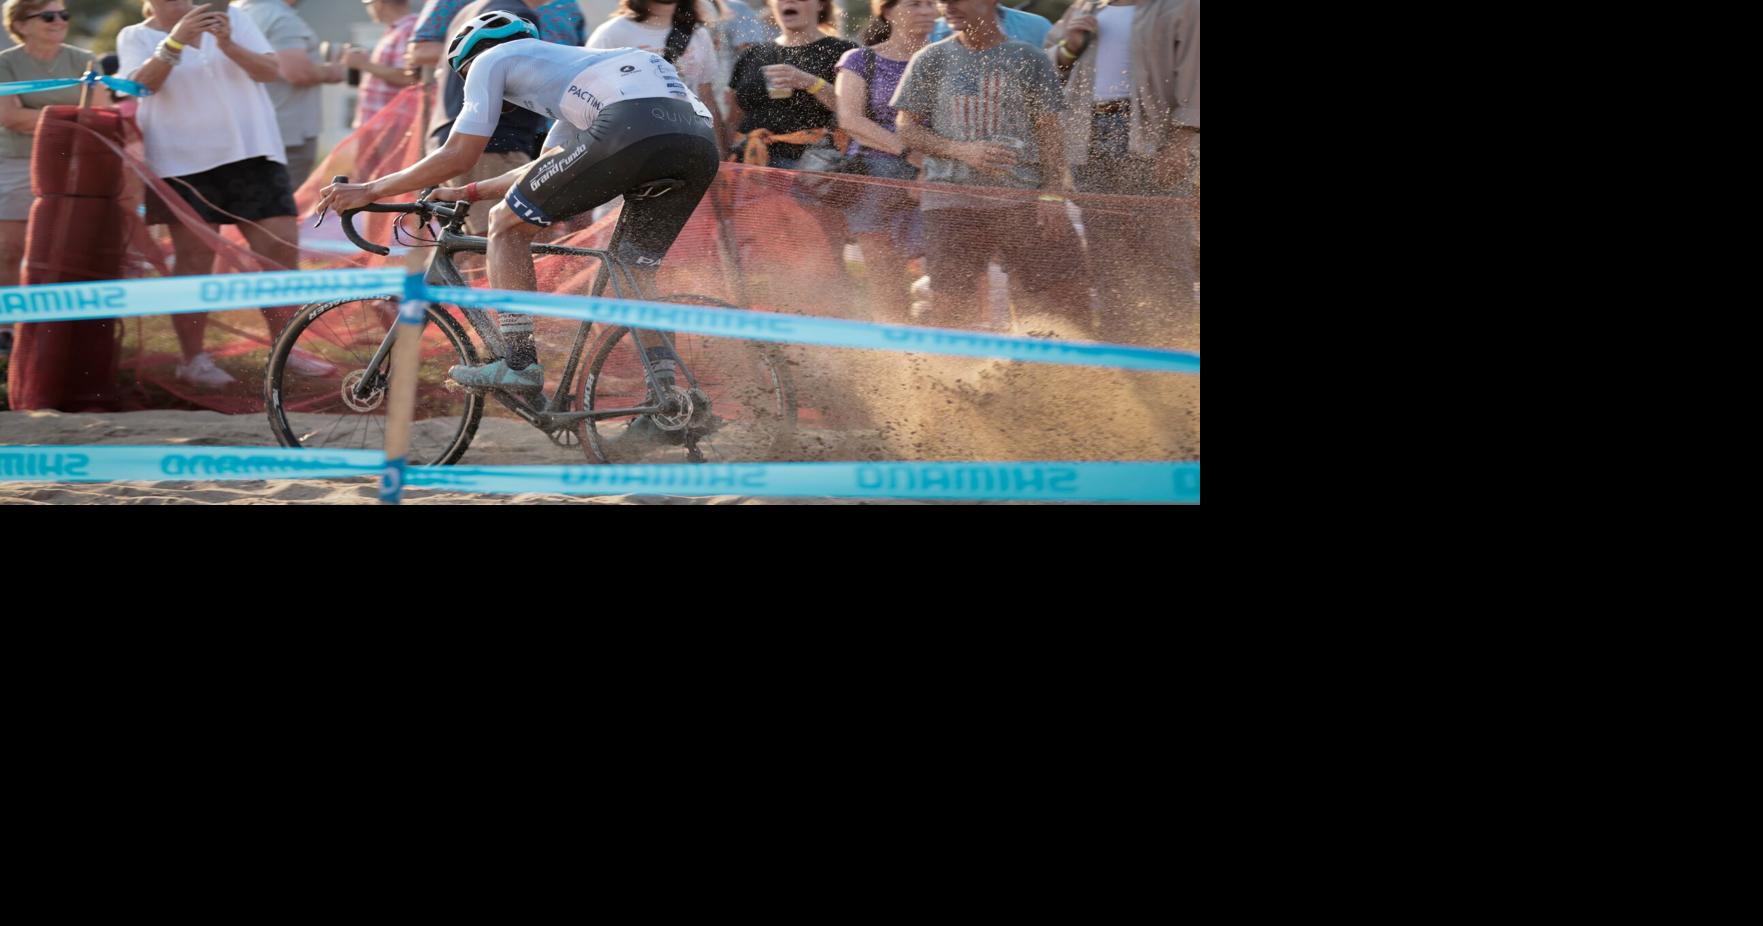 Third annual Gran Prix of Beverly returns Sept. 9, featuring homegrown US champion | Sports